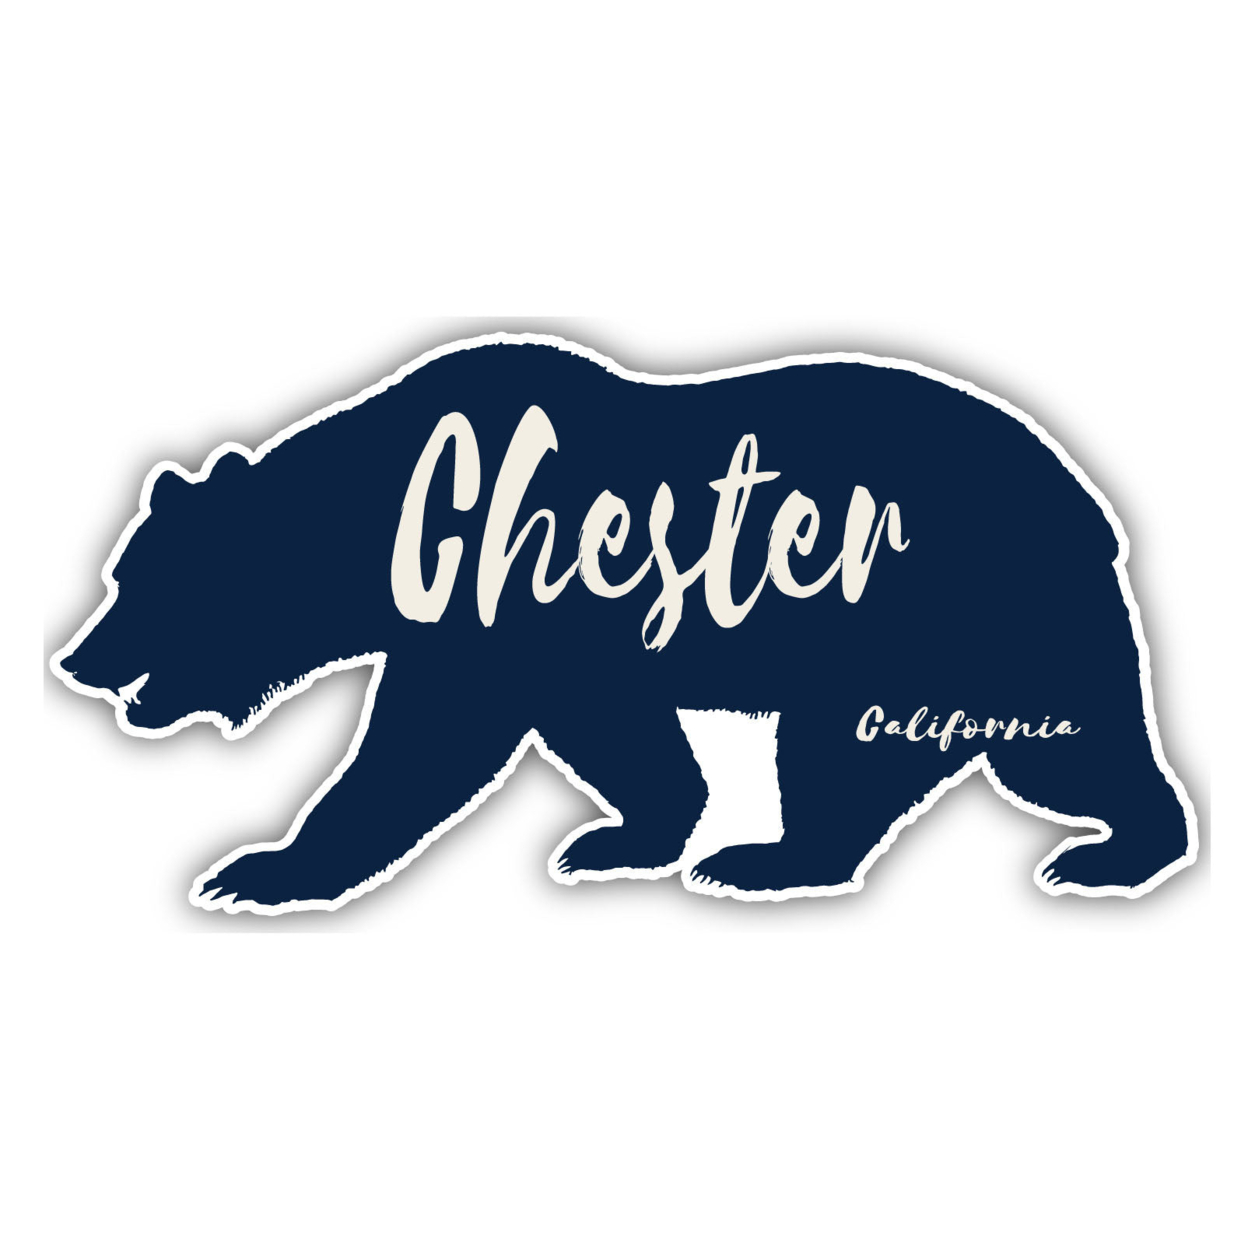 Chester California Souvenir Decorative Stickers (Choose Theme And Size) - 4-Pack, 10-Inch, Great Outdoors